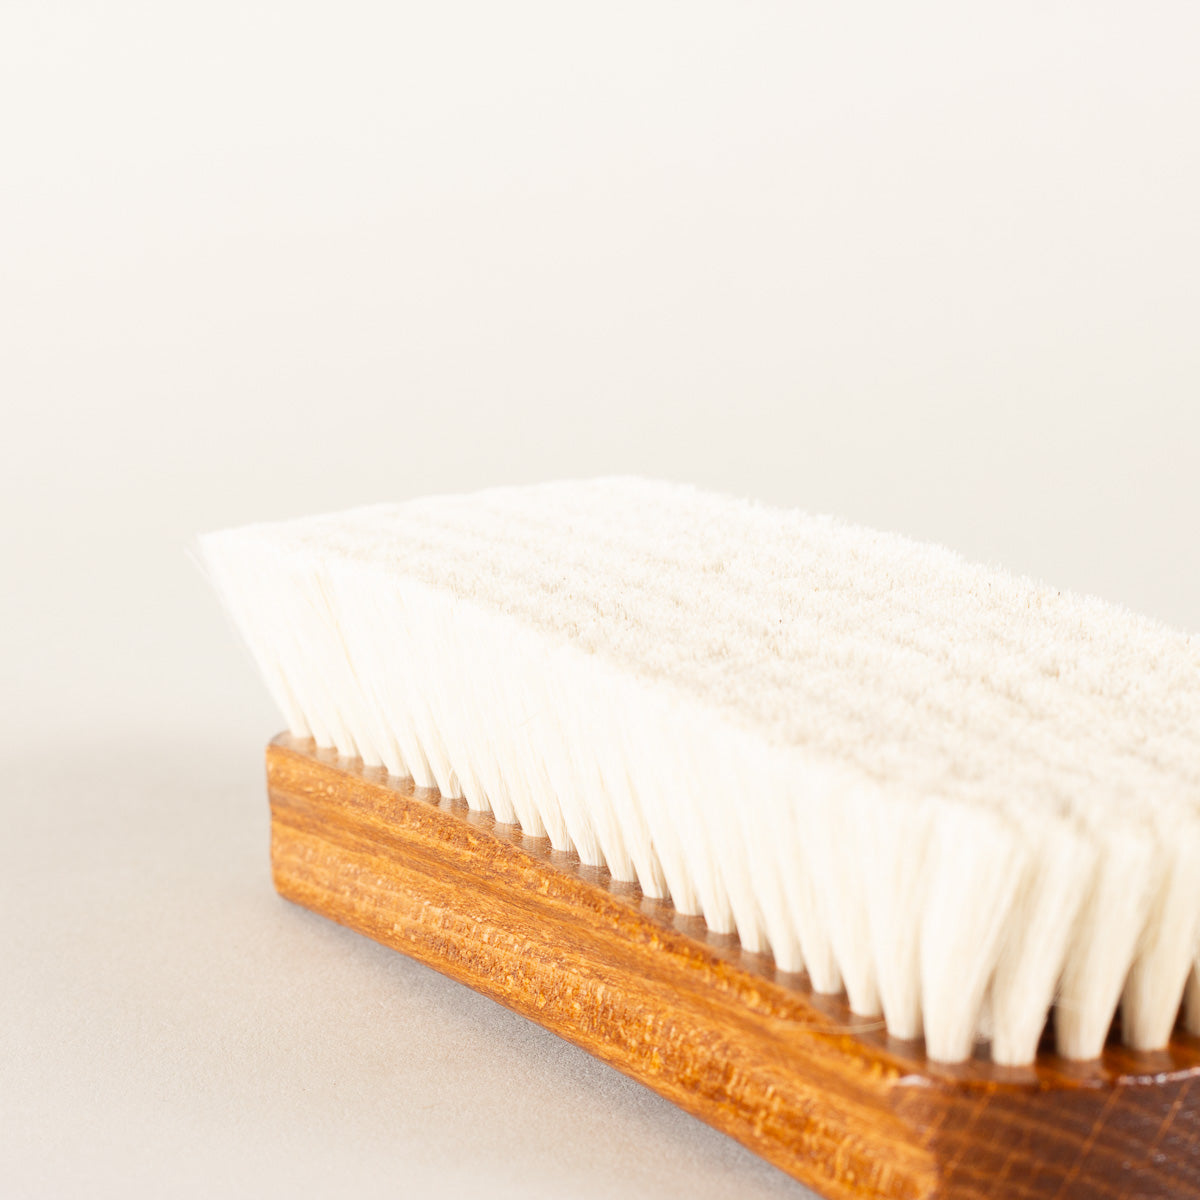 Wellington Deluxe Pig Bristle Suede Cleaning Brush